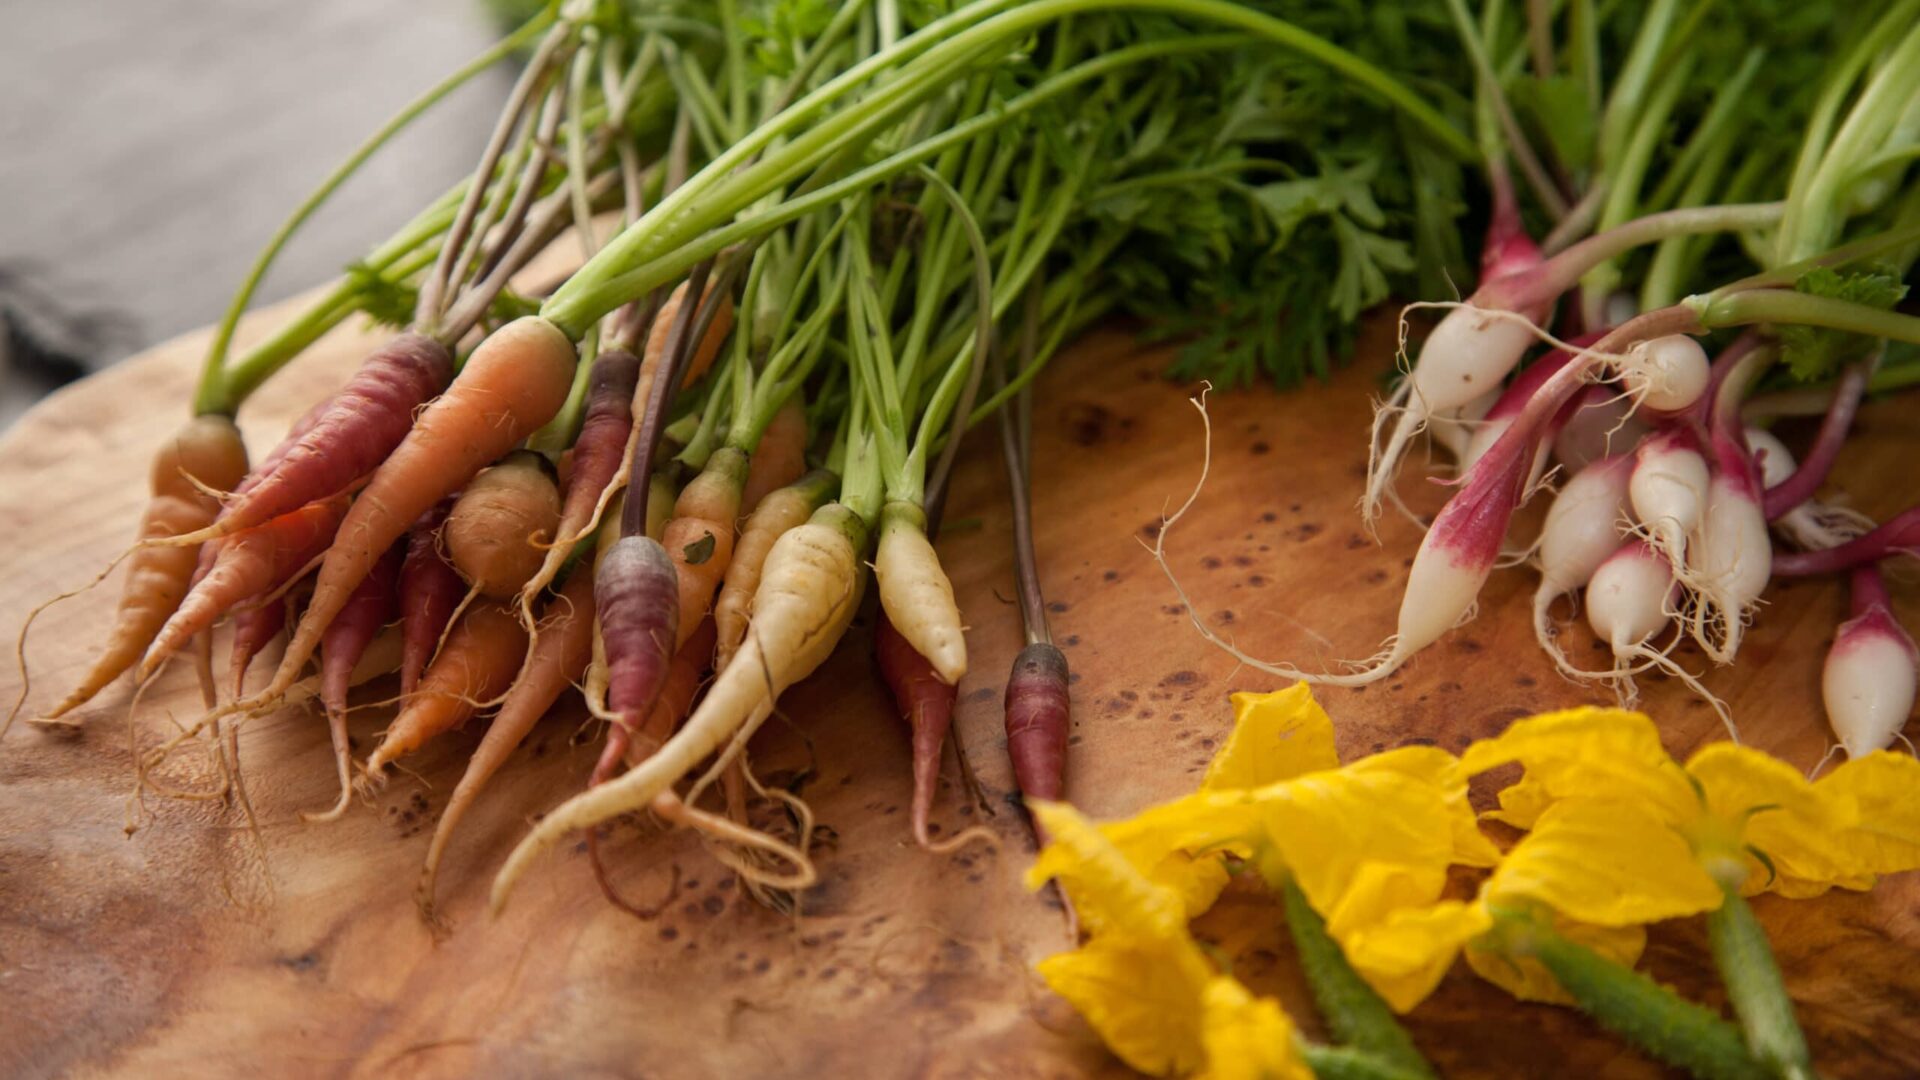 Vermont Farm fresh local carrots and radishes